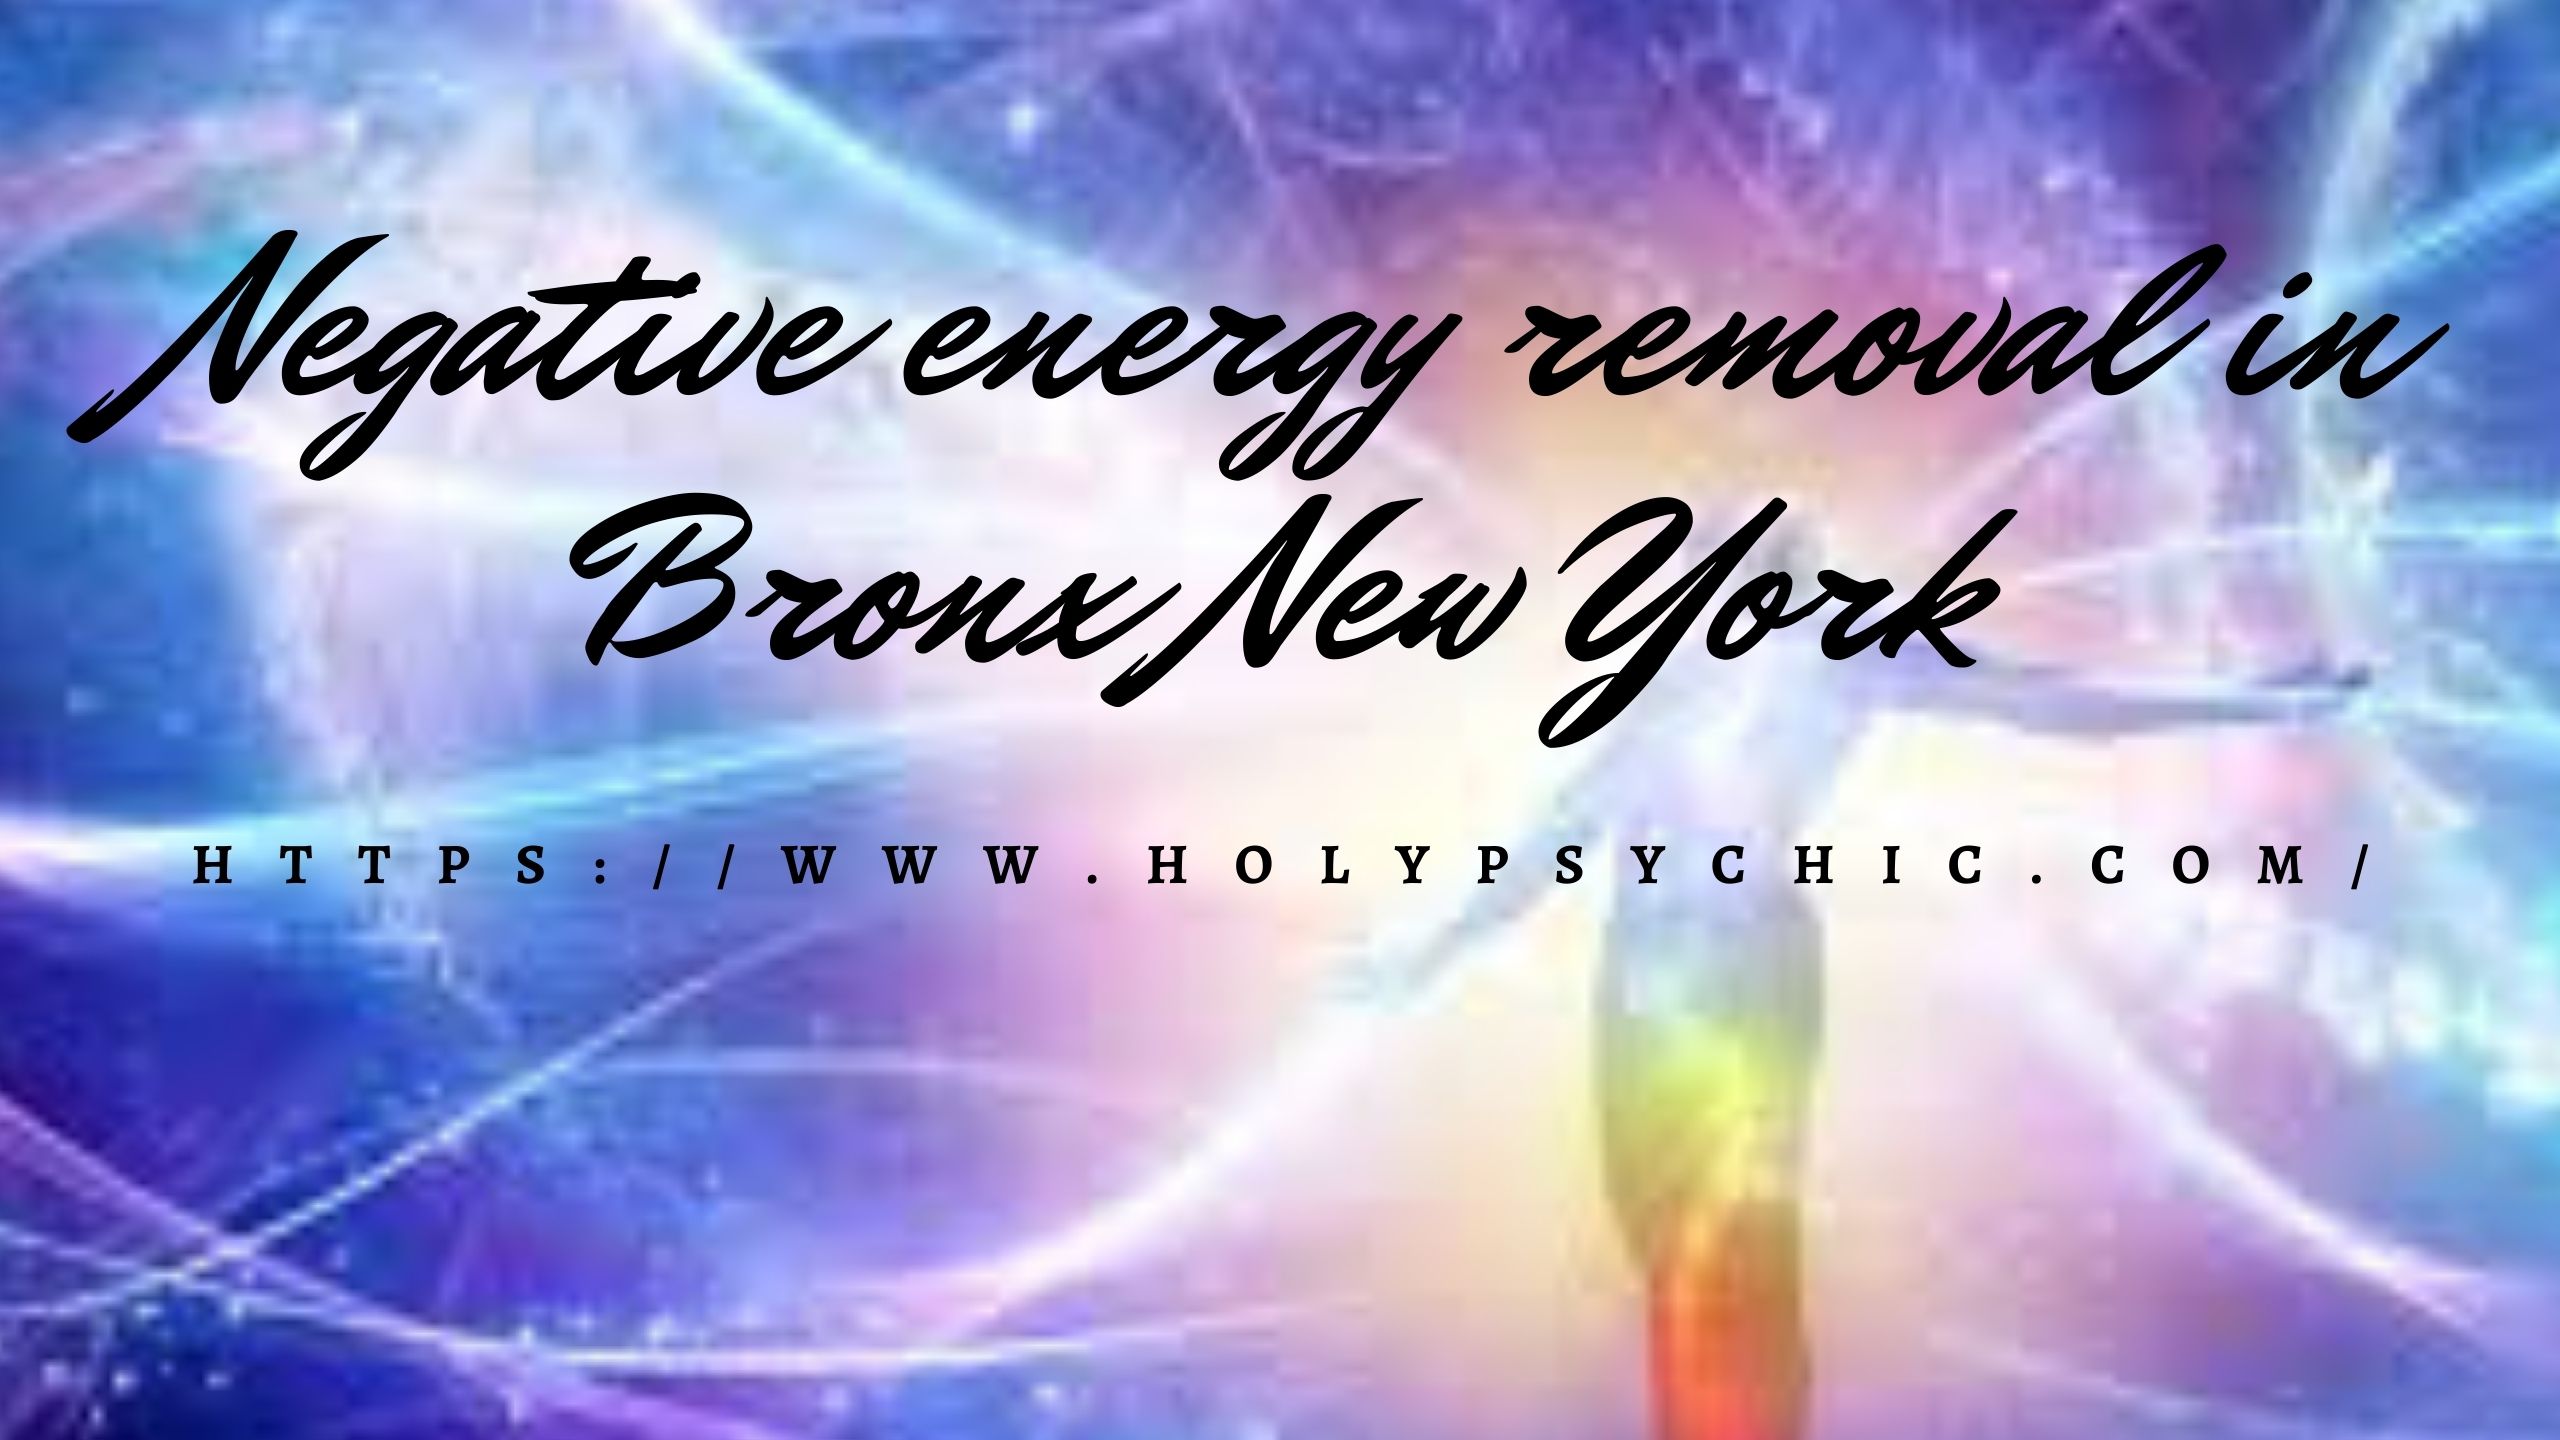 Negative energy removal in Bronx New York